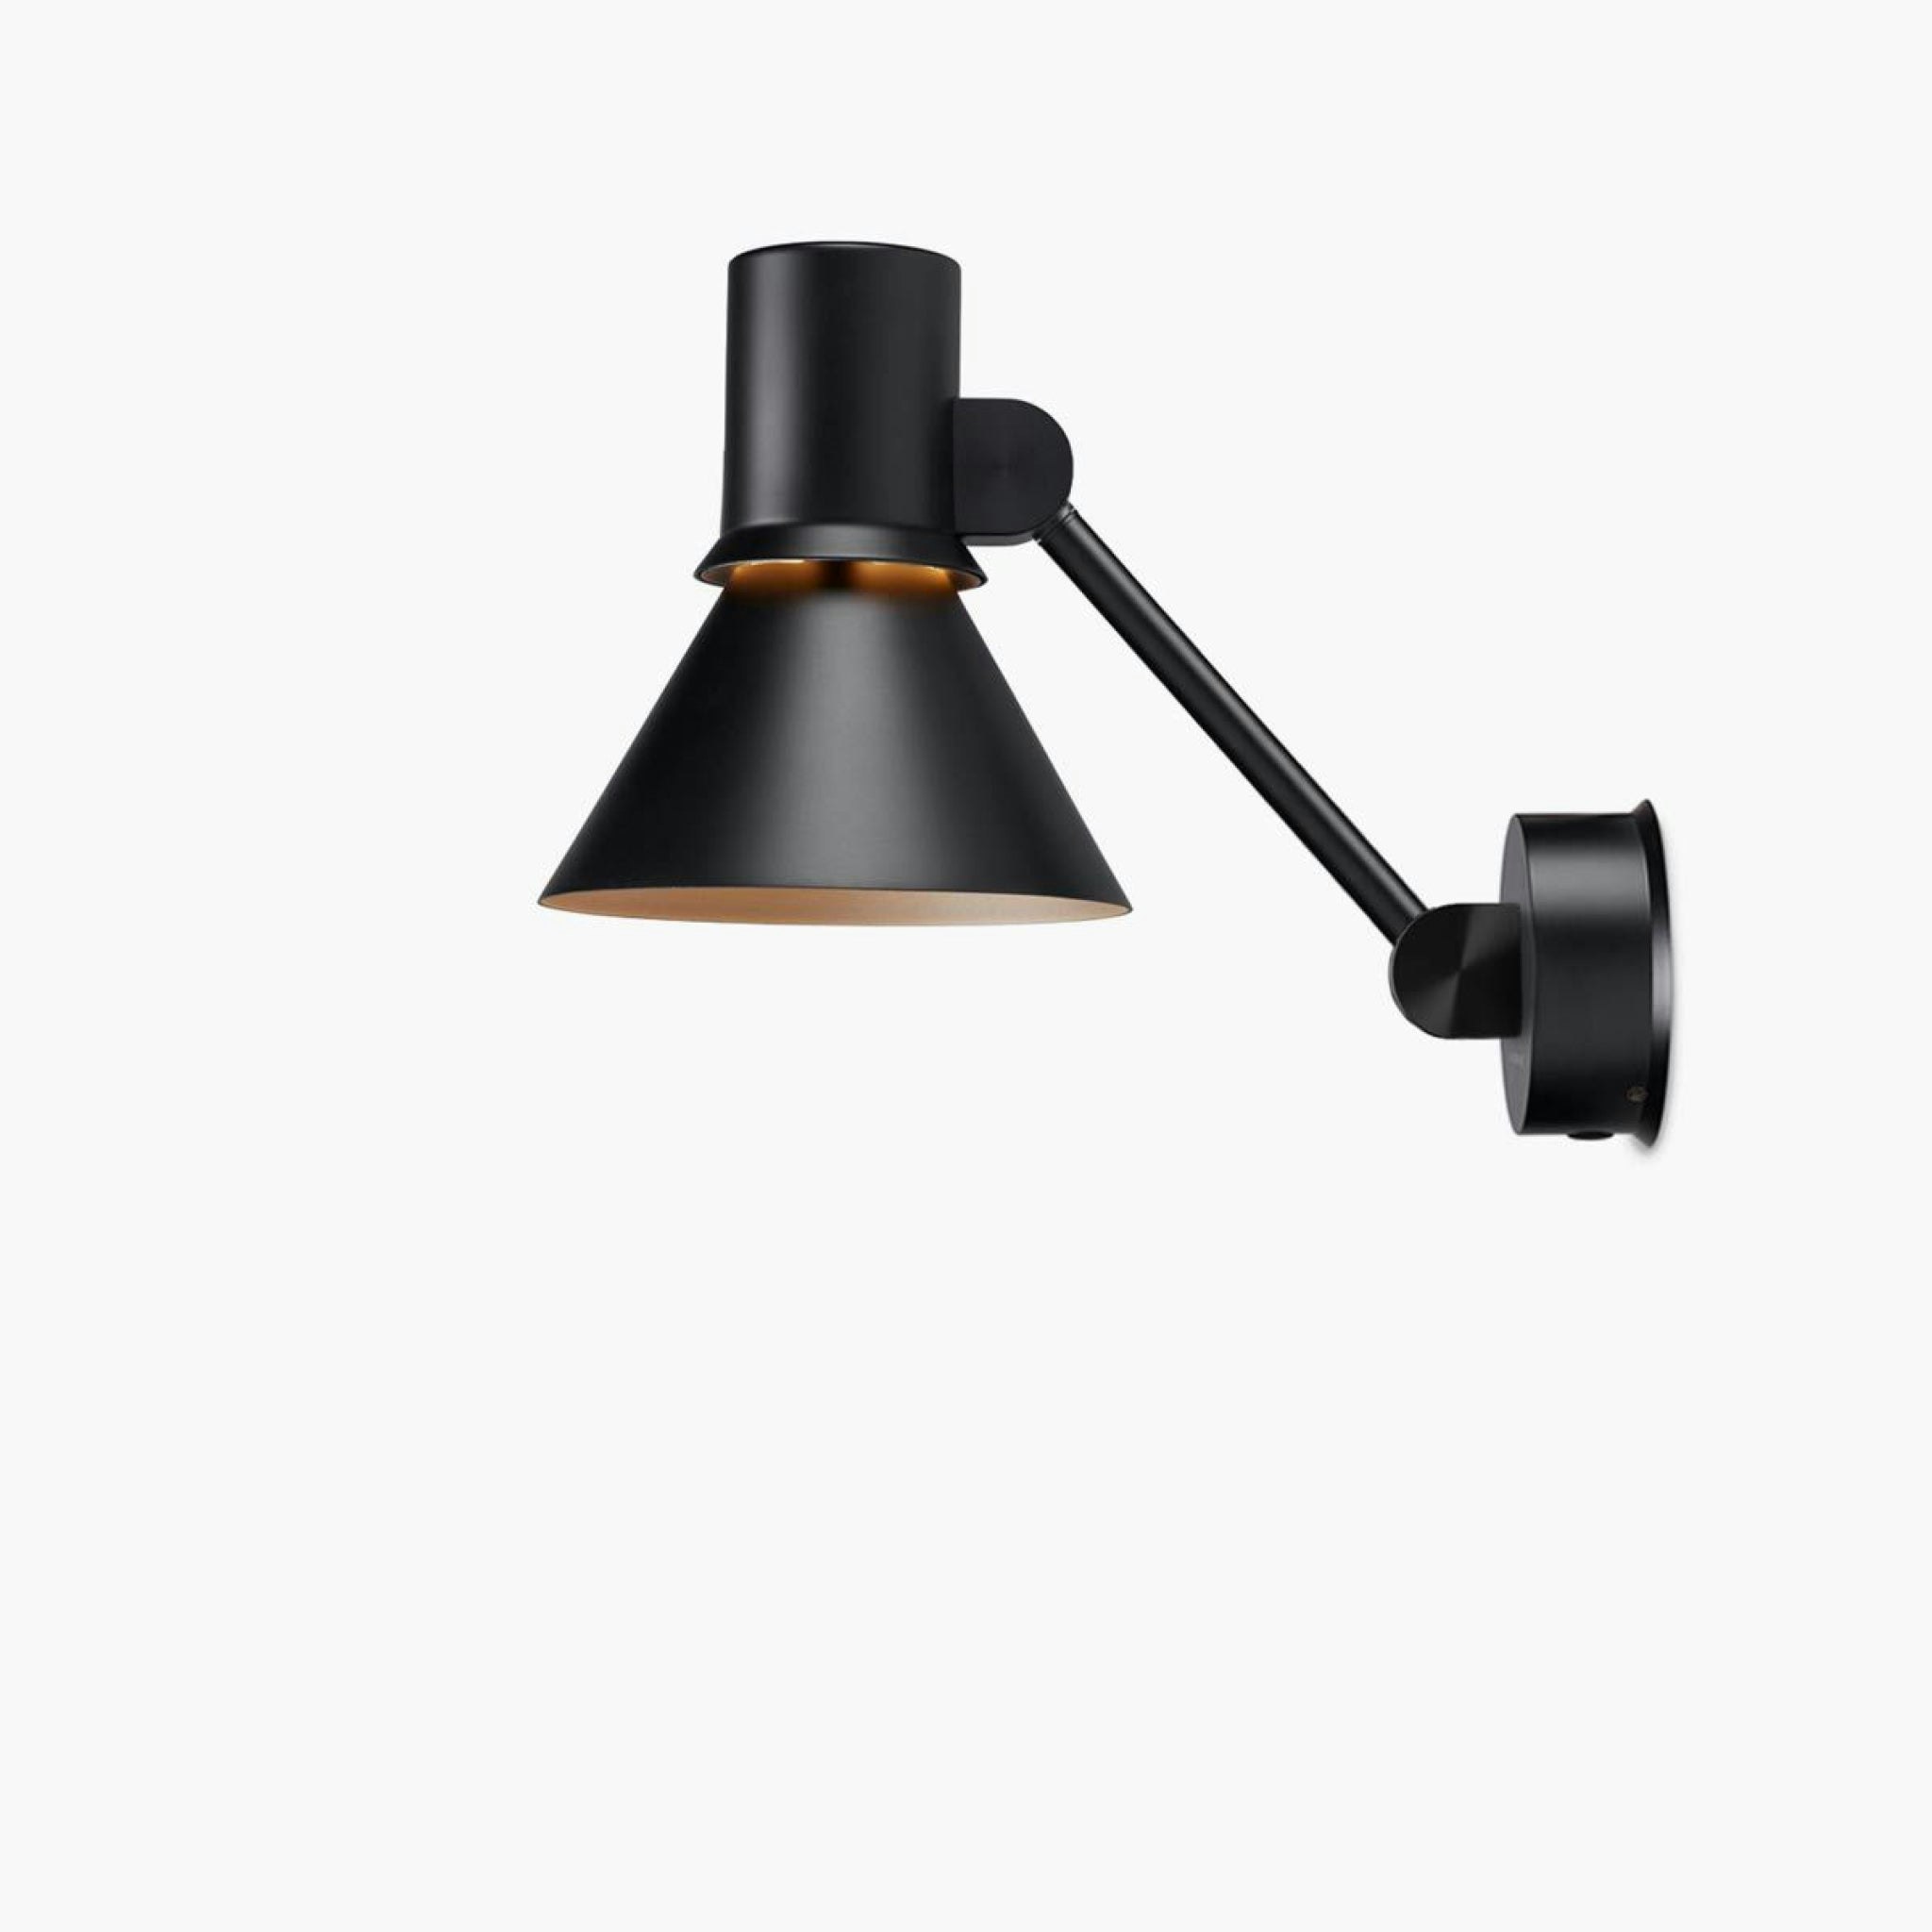 Type 80 W2 Wall Lamp by Kenneth Grange for Anglepoise